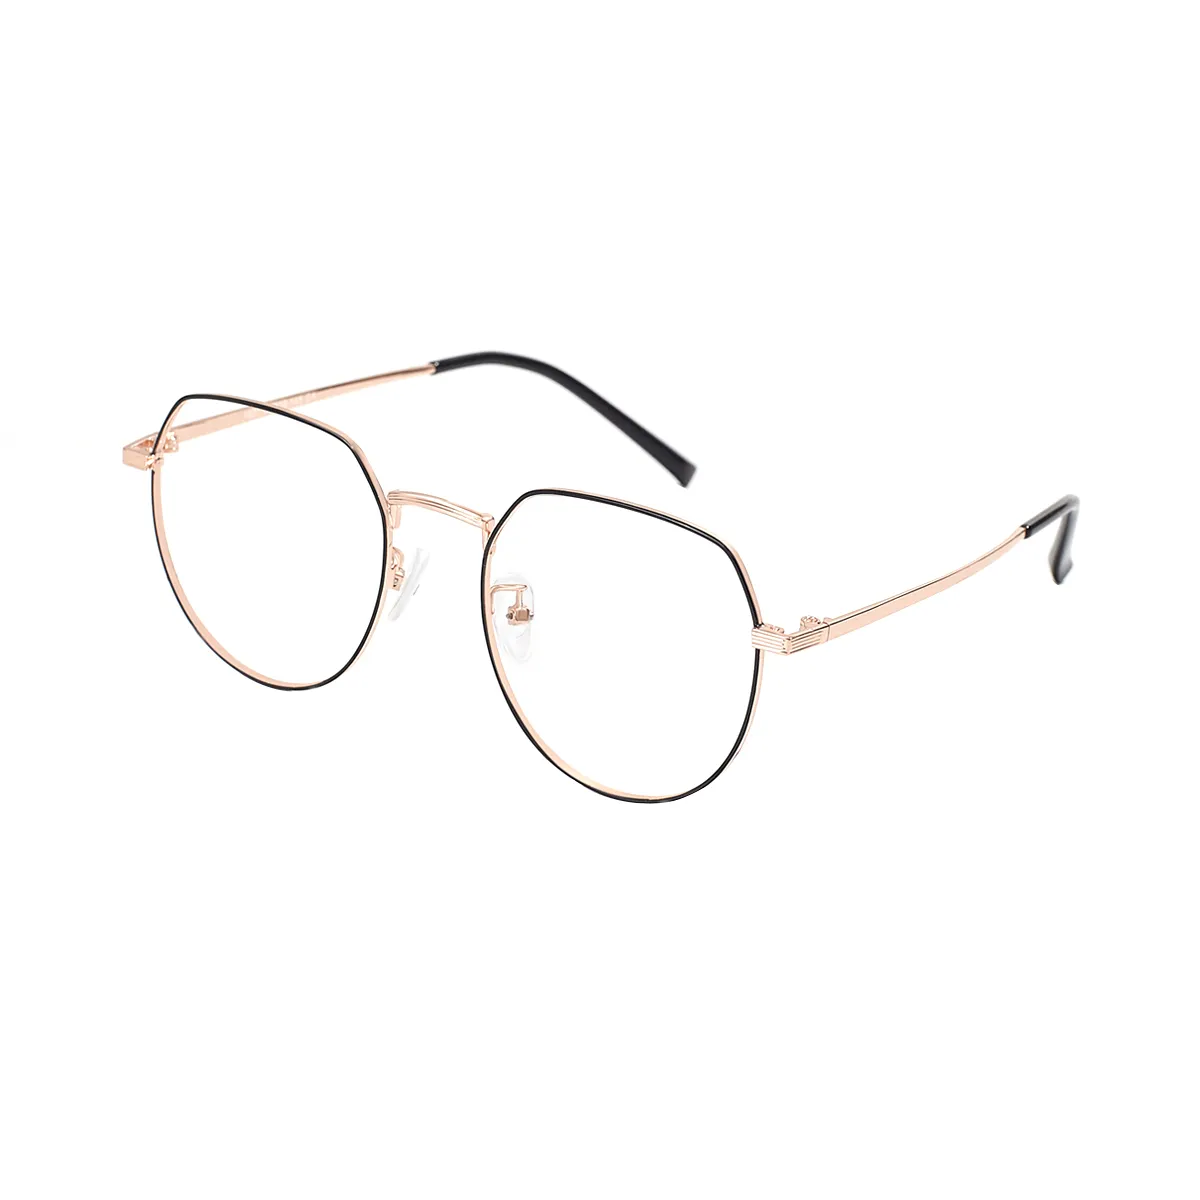 Fashion Oval Rose-Gold Glasses for Women